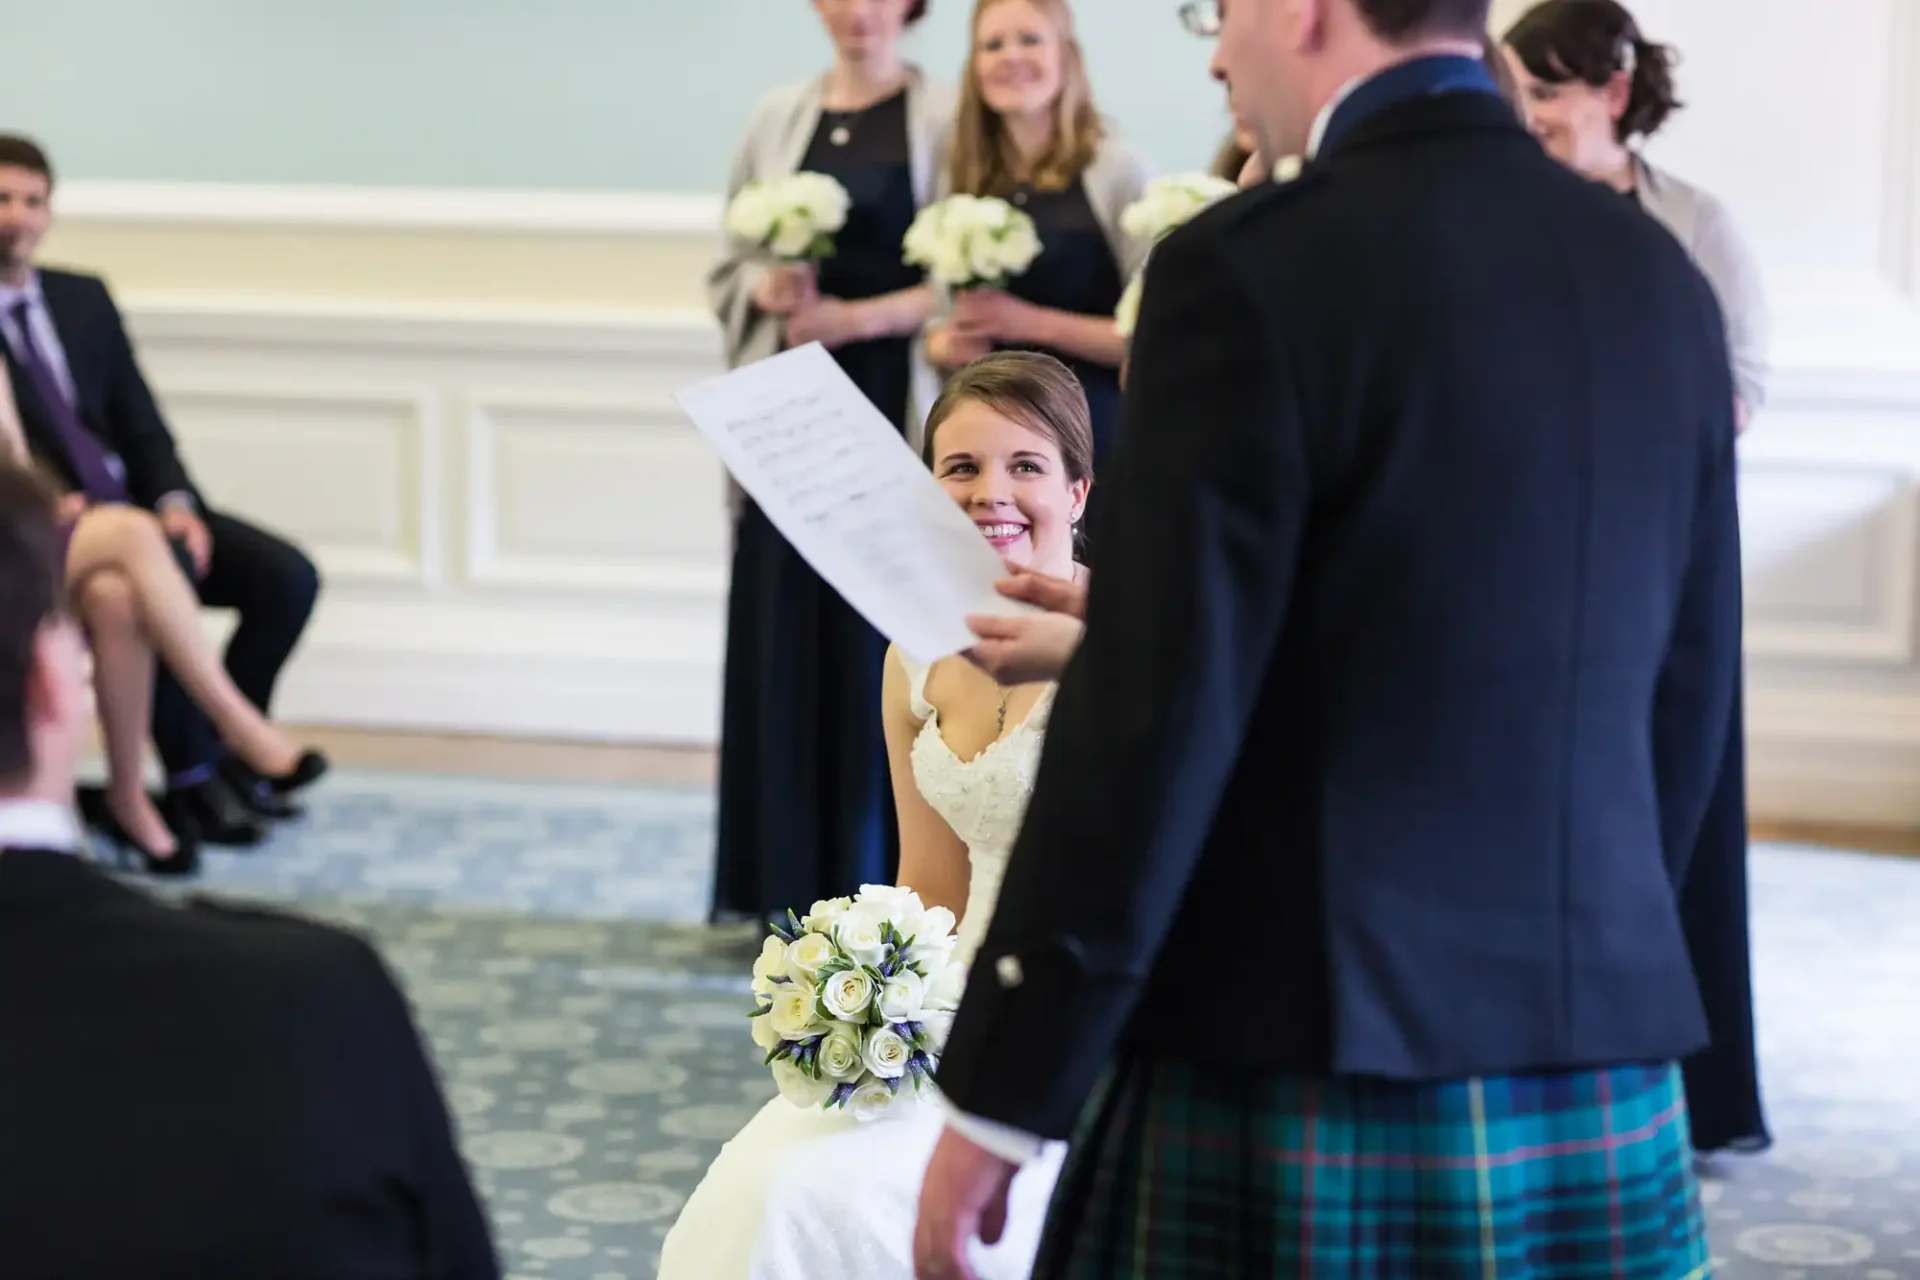 A bride in a white dress smiling and looking up at a man in a kilt during a wedding ceremony, with guests and bridesmaids in the background.